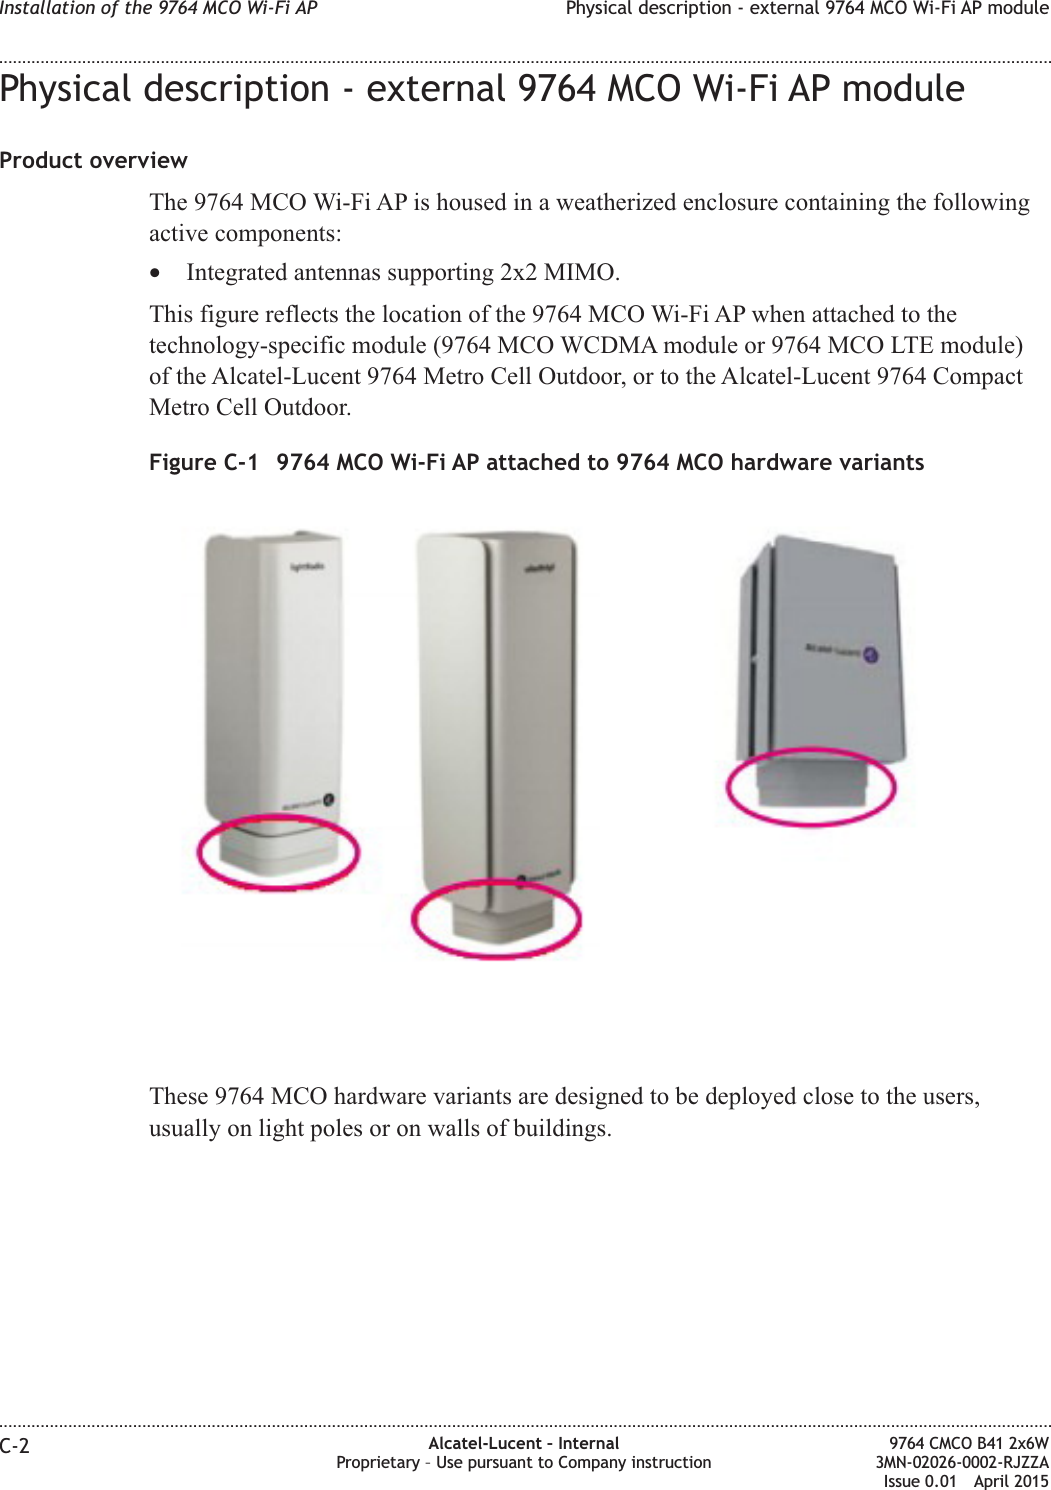 Physical description - external 9764 MCO Wi-Fi AP moduleProduct overviewThe 9764 MCO Wi-Fi AP is housed in a weatherized enclosure containing the followingactive components:•Integrated antennas supporting 2x2 MIMO.This figure reflects the location of the 9764 MCO Wi-Fi AP when attached to thetechnology-specific module (9764 MCO WCDMA module or 9764 MCO LTE module)of the Alcatel-Lucent 9764 Metro Cell Outdoor, or to the Alcatel-Lucent 9764 CompactMetro Cell Outdoor.These 9764 MCO hardware variants are designed to be deployed close to the users,usually on light poles or on walls of buildings.Figure C-1 9764 MCO Wi-Fi AP attached to 9764 MCO hardware variantsInstallation of the 9764 MCO Wi-Fi AP Physical description - external 9764 MCO Wi-Fi AP module........................................................................................................................................................................................................................................................................................................................................................................................................................................................................C-2 Alcatel-Lucent – InternalProprietary – Use pursuant to Company instruction9764 CMCO B41 2x6W3MN-02026-0002-RJZZAIssue 0.01 April 2015PRELIMINARYPRELIMINARY